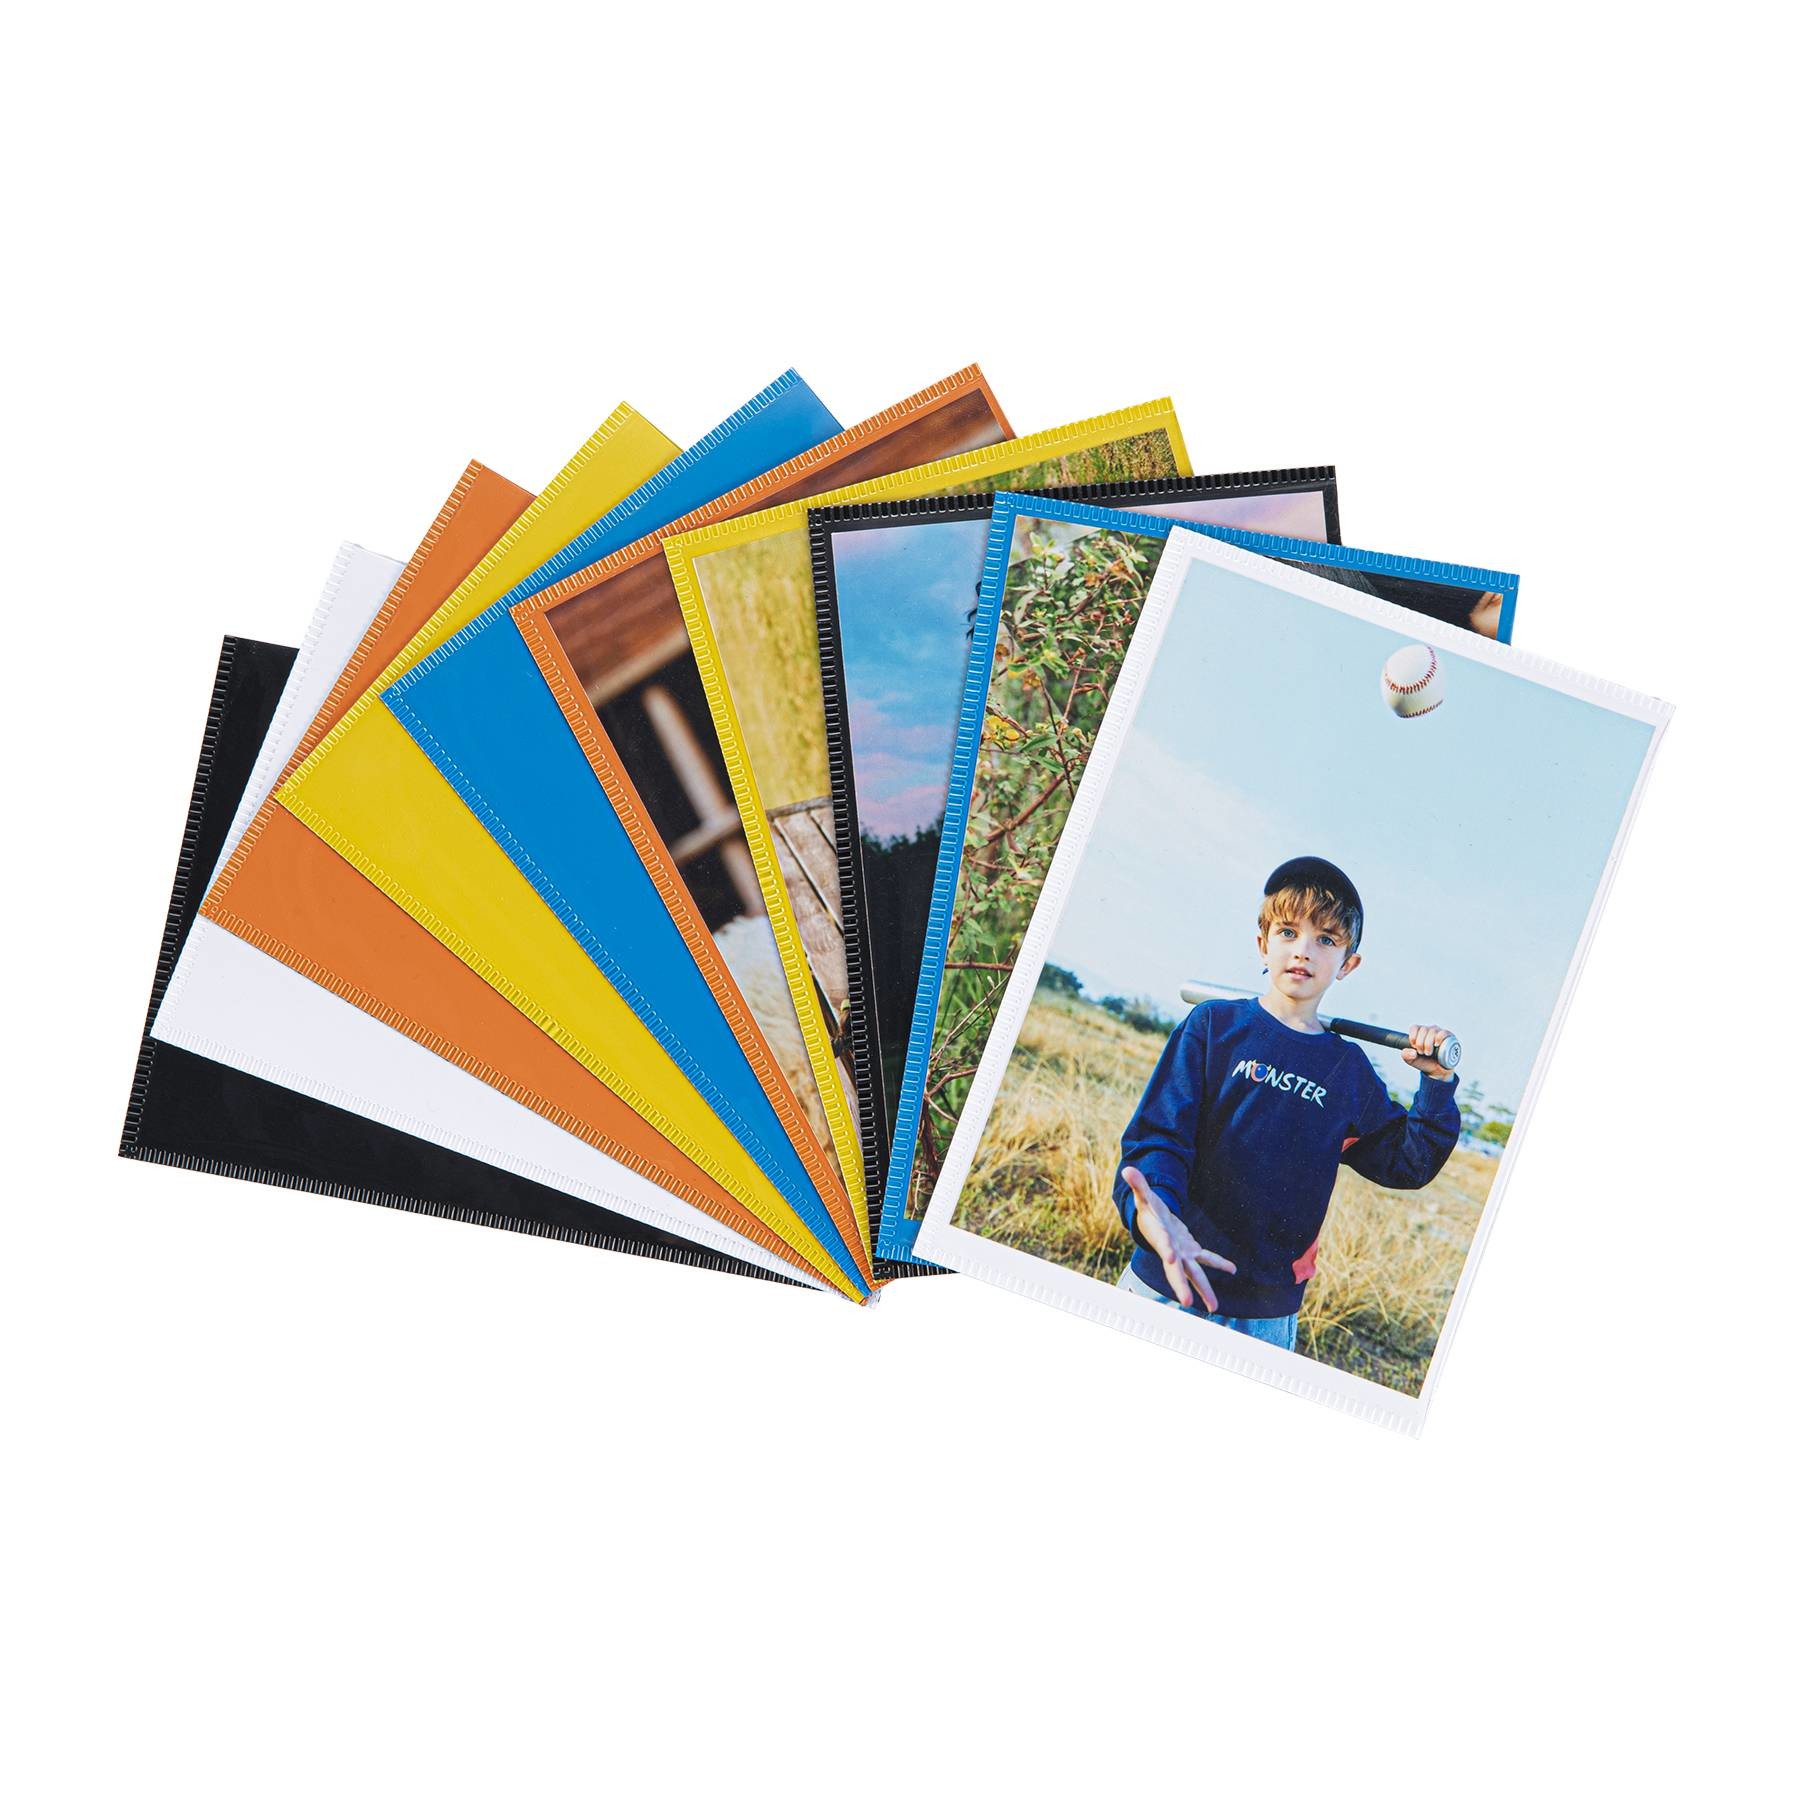 Buy Custom Size Magnetic Photo Pocket Black Magnetic Photo Frames at wholesale prices